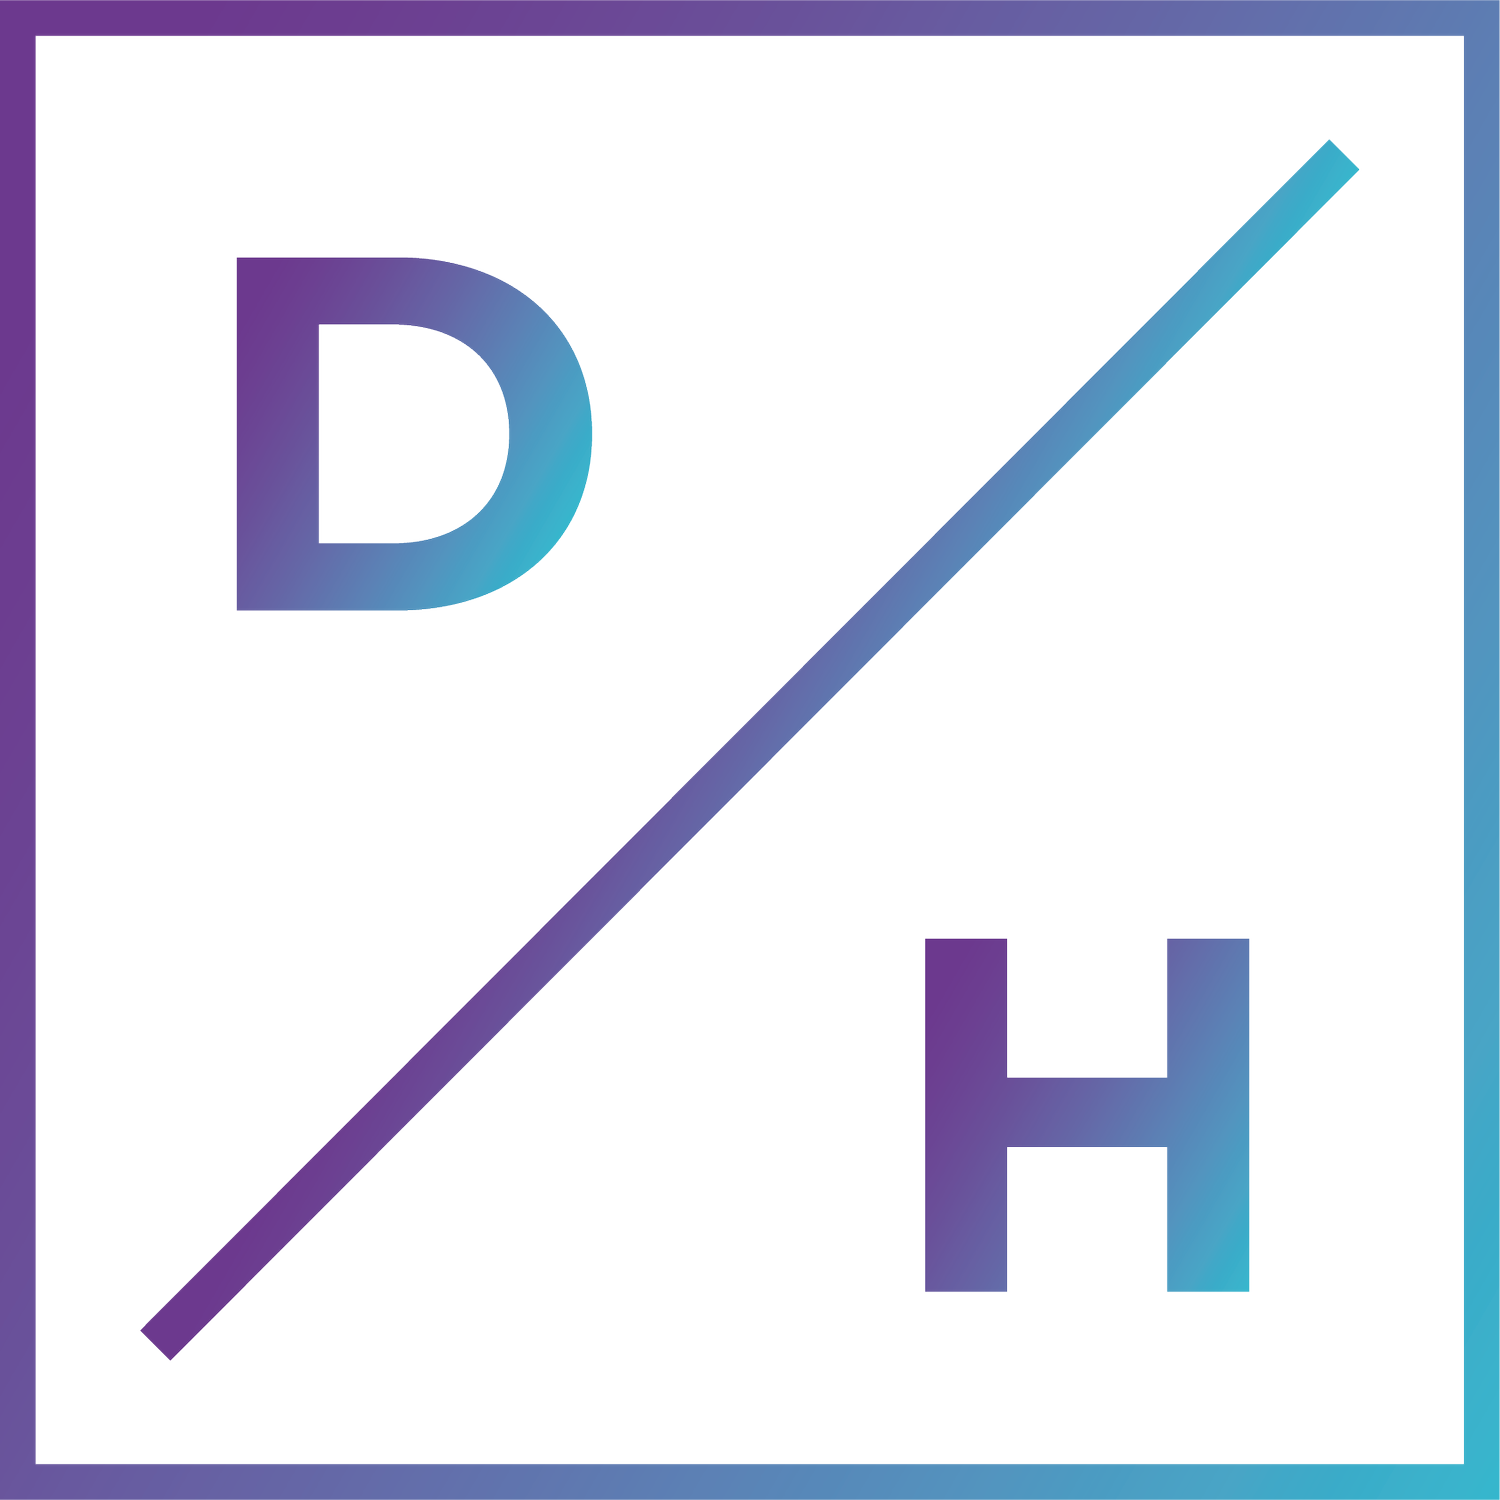 DH Media Group